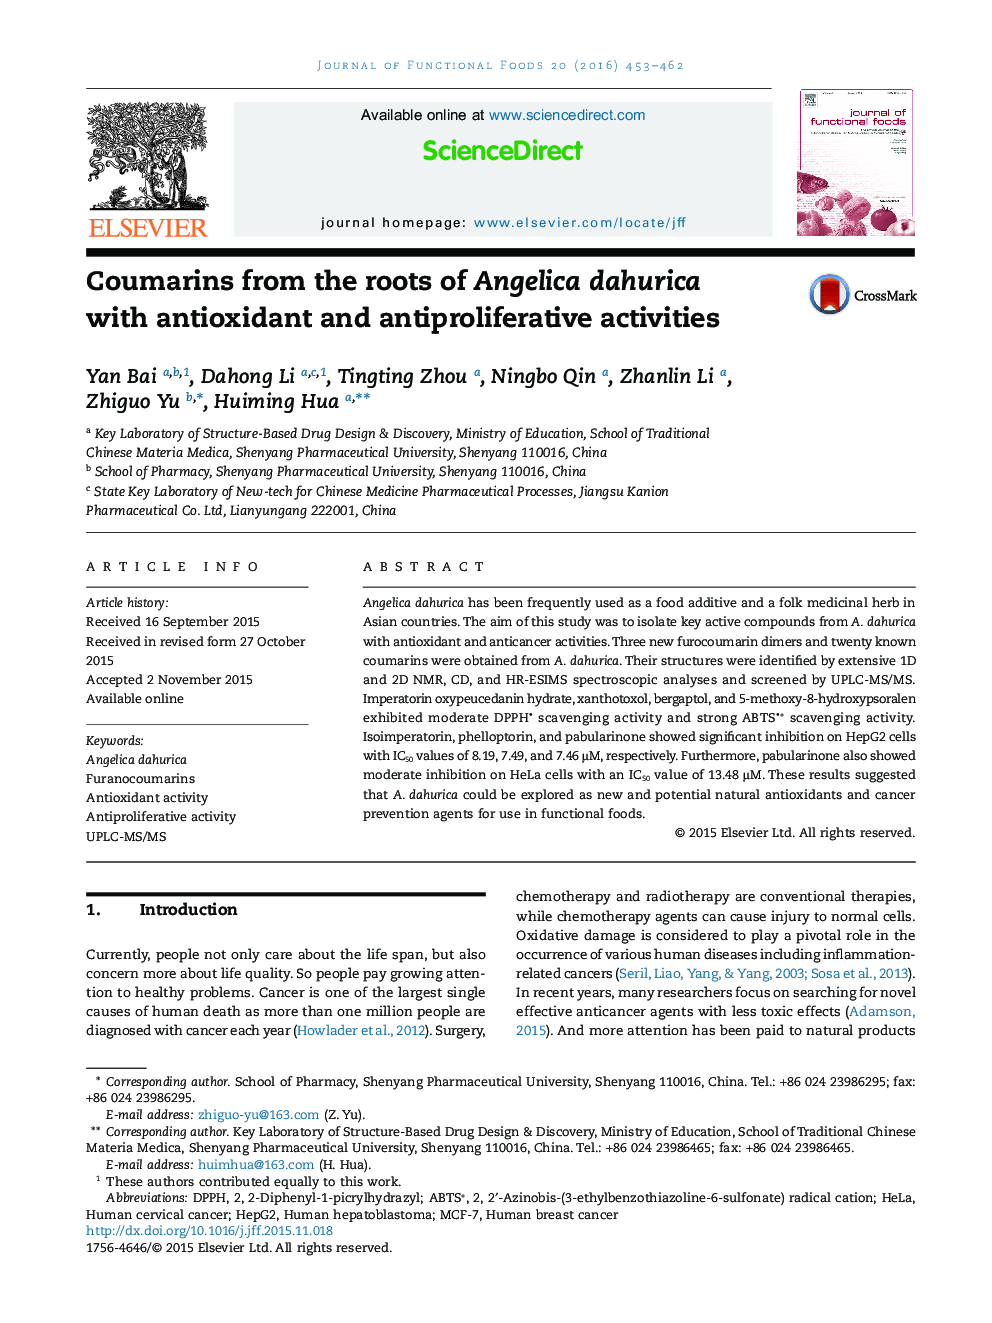 Coumarins from the roots of Angelica dahurica with antioxidant and antiproliferative activities